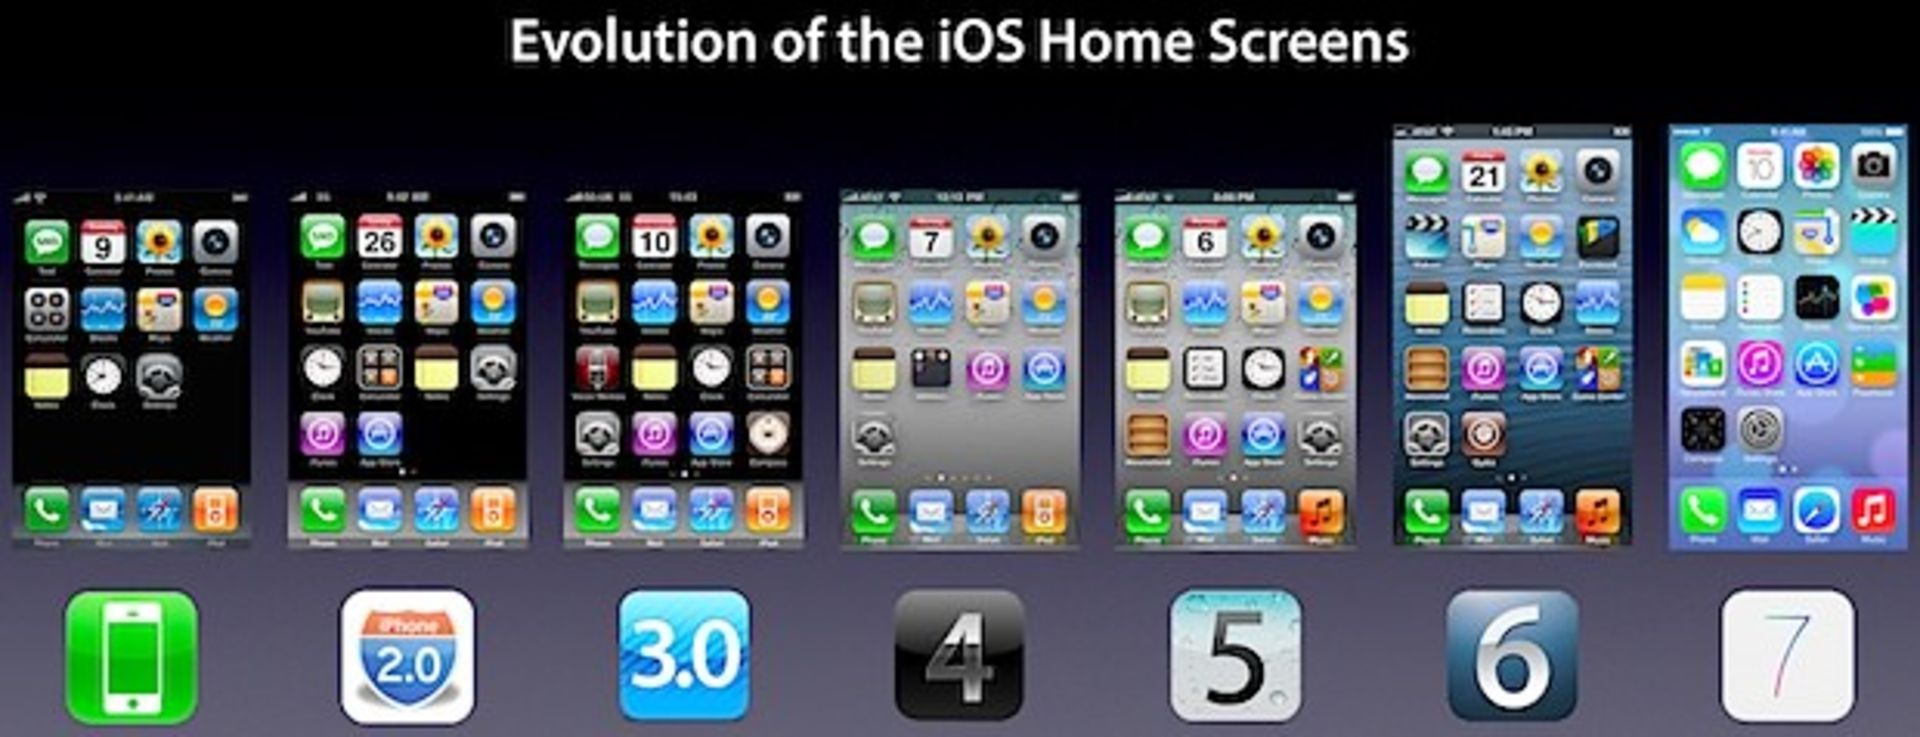 evolution-of-ios-iphone-home-screen